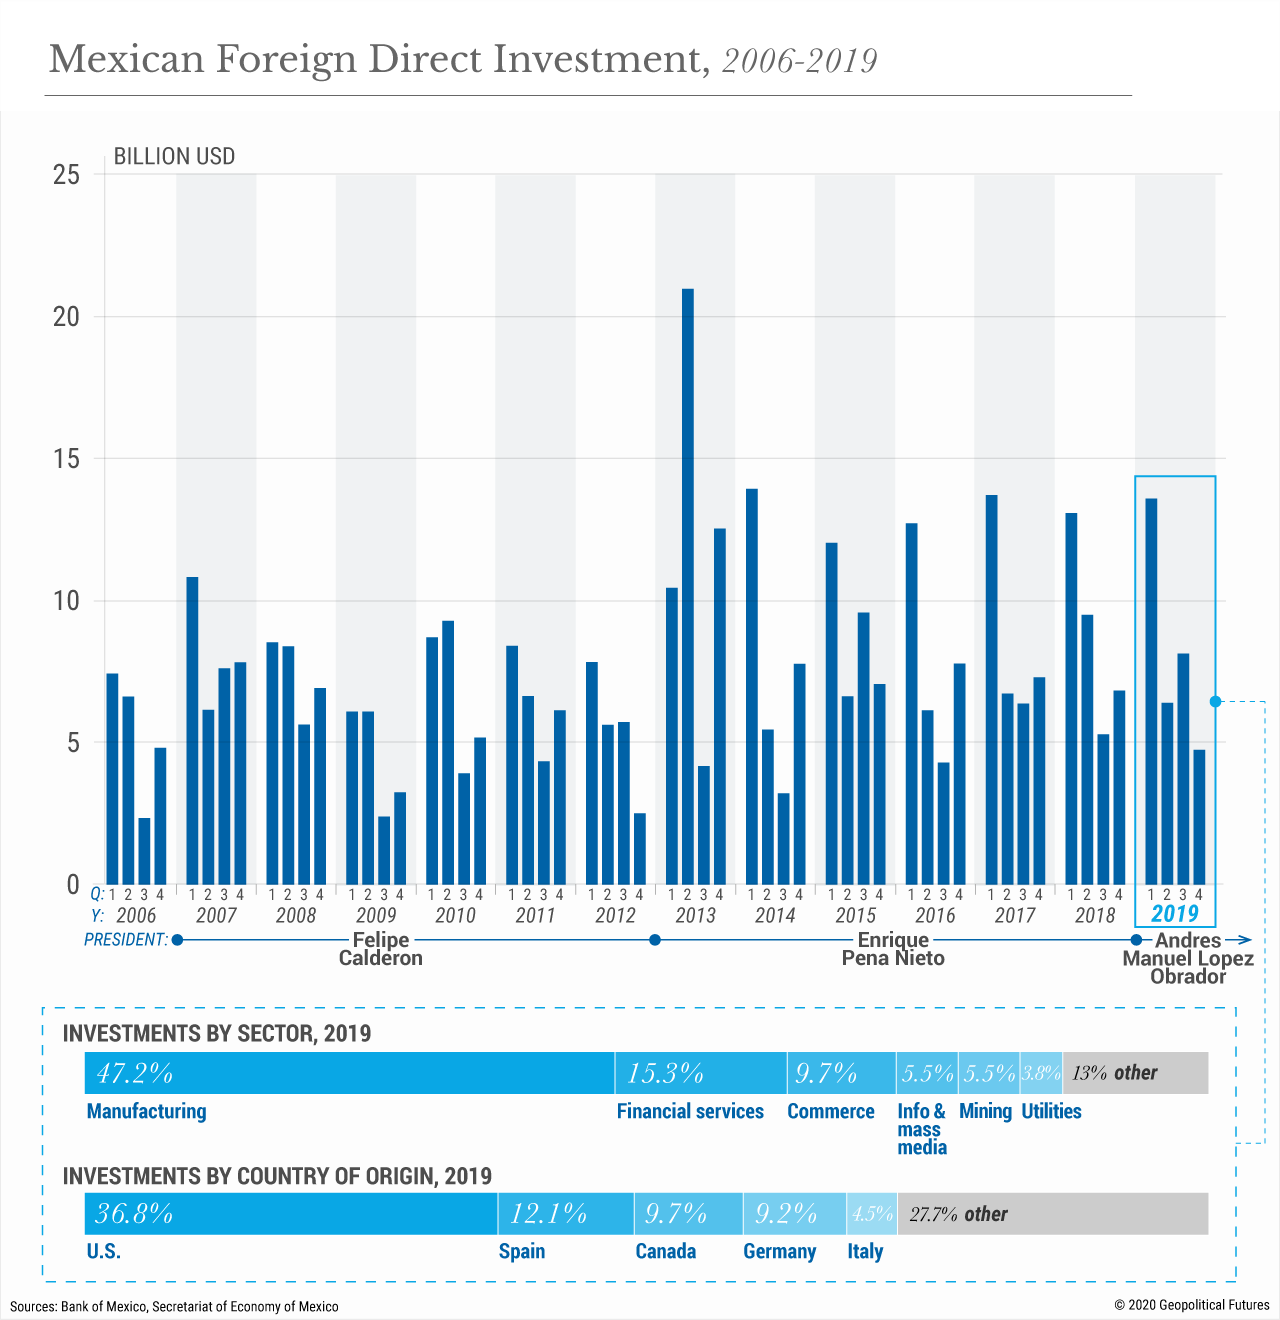 Mexican Foreign Direct Investment, 2006-2019